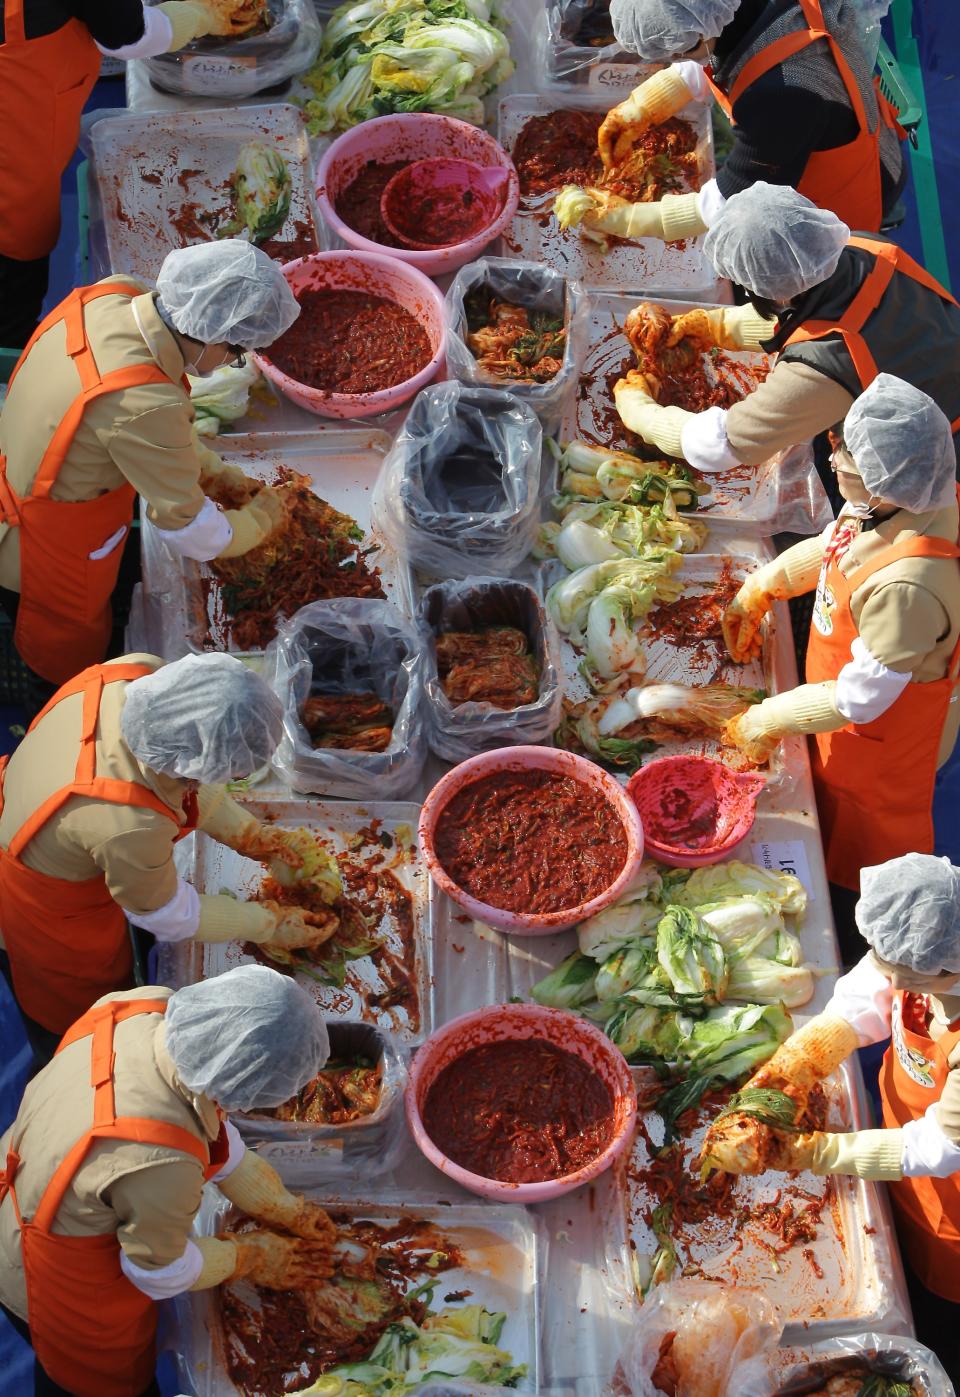 SEOUL, SOUTH KOREA - NOVEMBER 15: More than two thousands of housewives make Kimchi for donation to the poor in preparation for winter in front of City Hall on November 15, 2012 in Seoul, South Korea. Kimchi is a traditional Korean dish of fermented vegetables usually mixed with chili and eaten with rice or served as a side dish to a main meal. (Photo by Chung Sung-Jun/Getty Images)